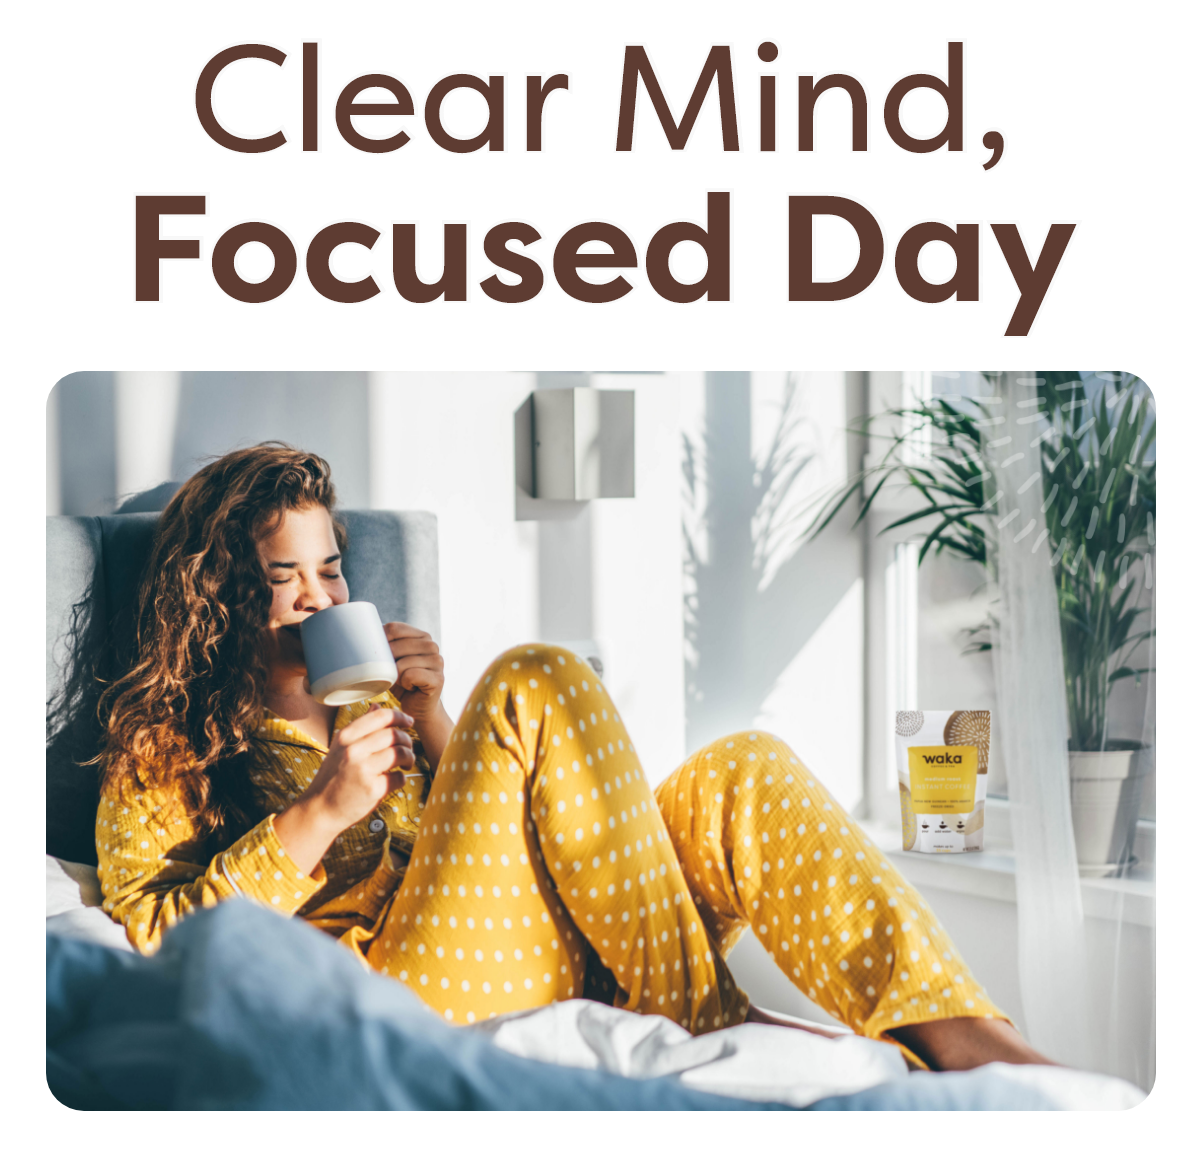 Clear Mind, Focused Day.